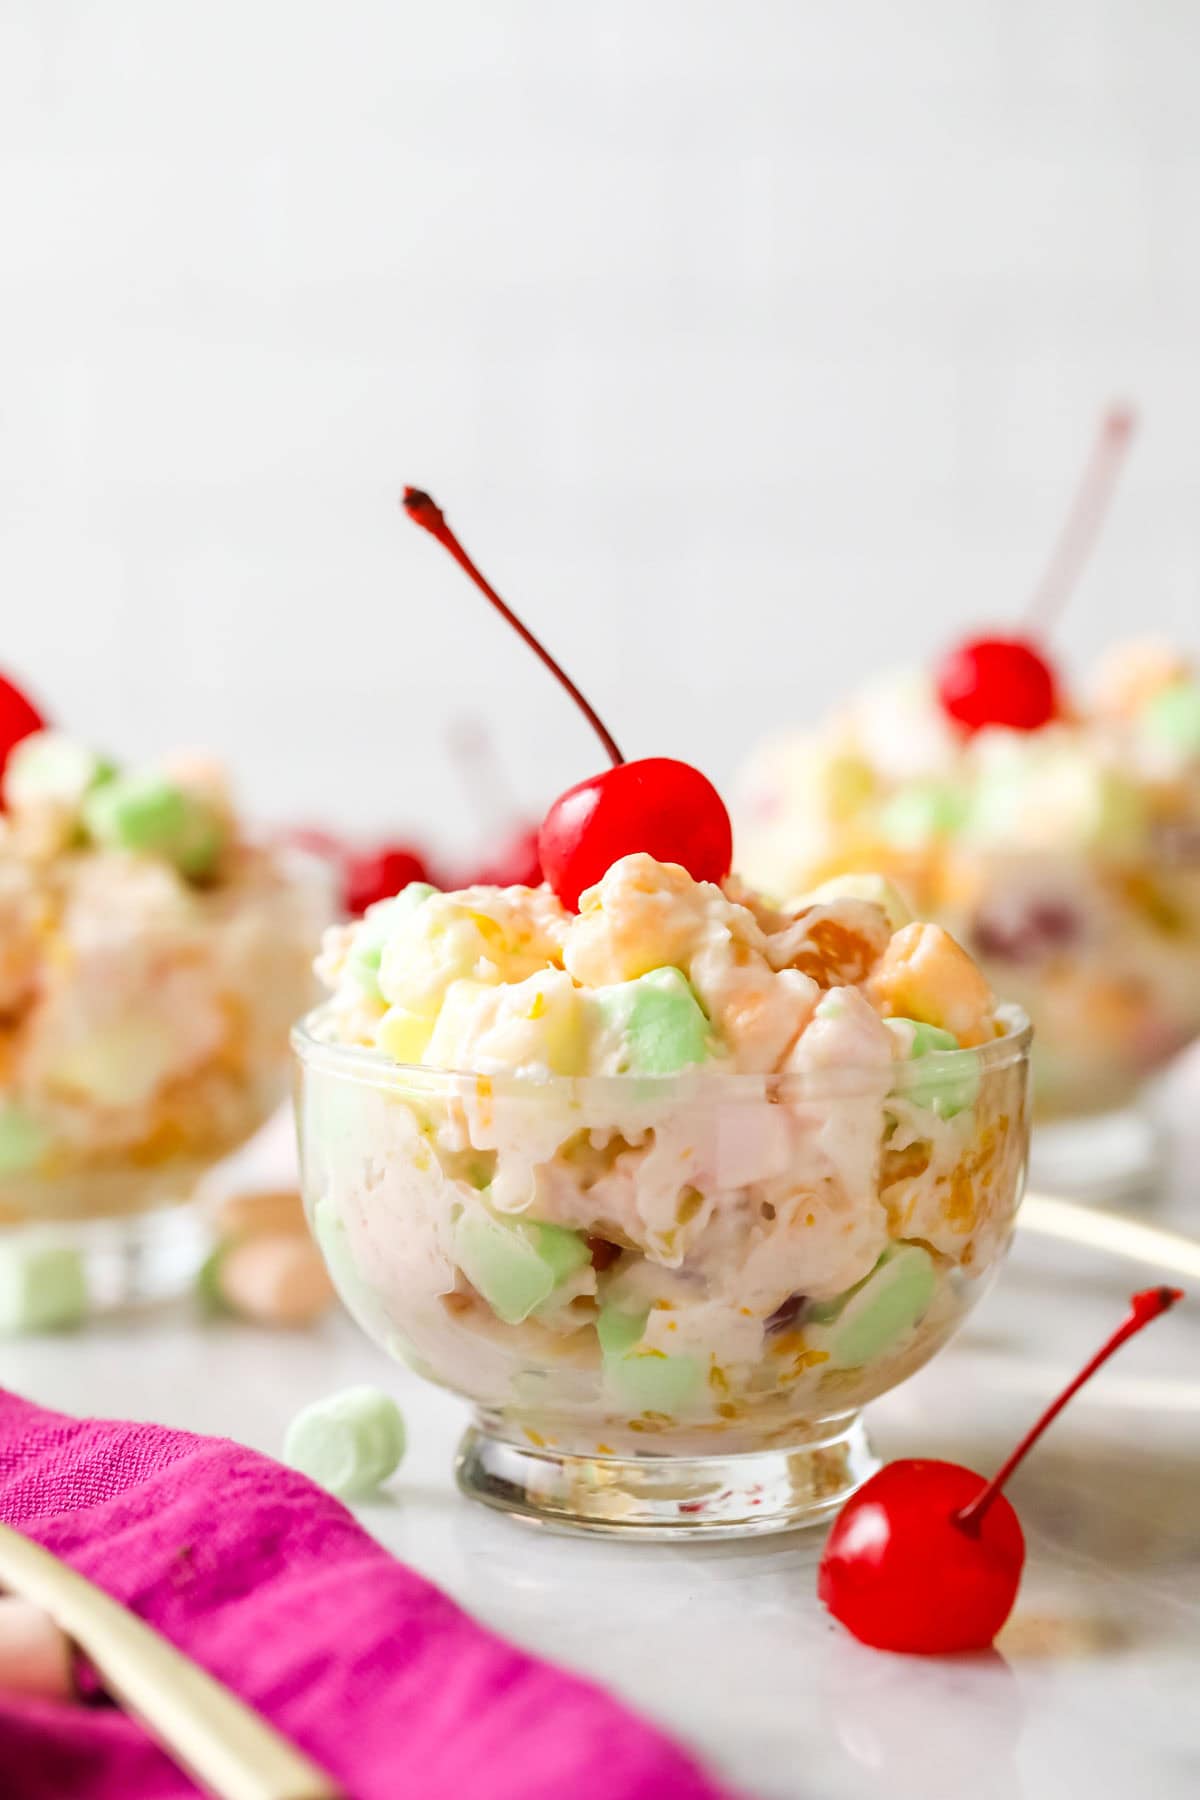 Glass bowl of ambrosia salad topped with a maraschino cherry.